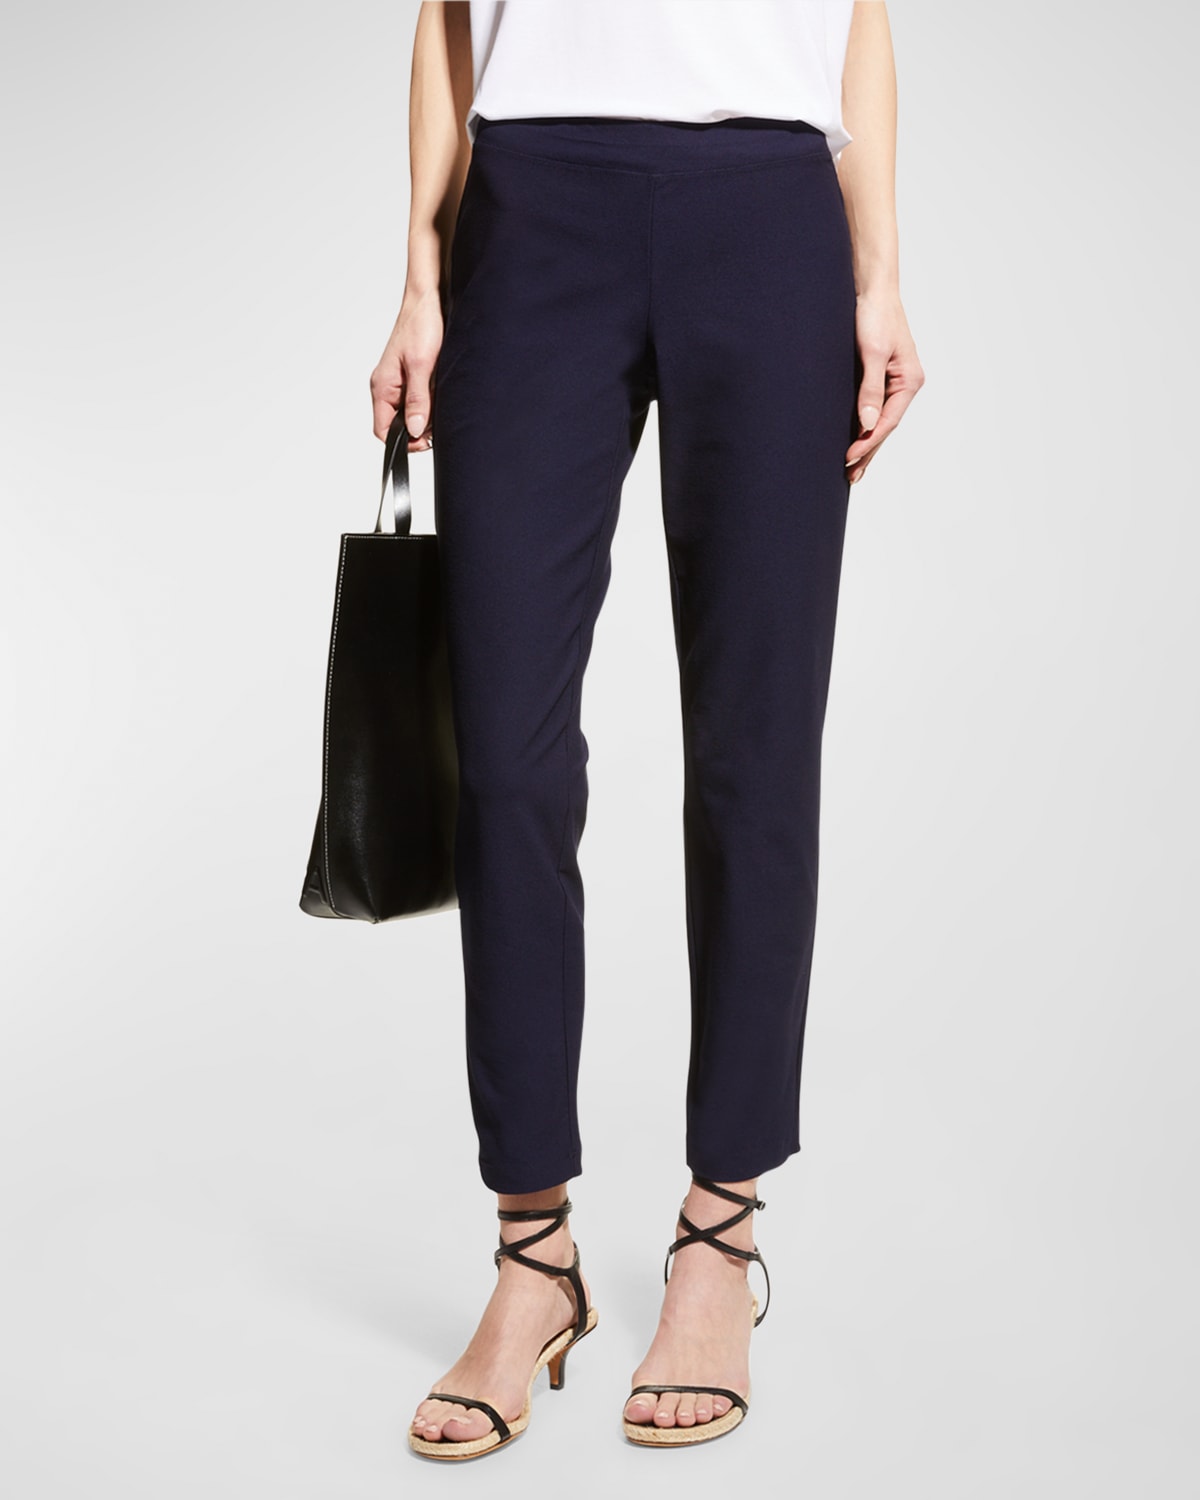 Eileen Fisher Washable Stretch Crepe Slim Ankle Pant - Midnight